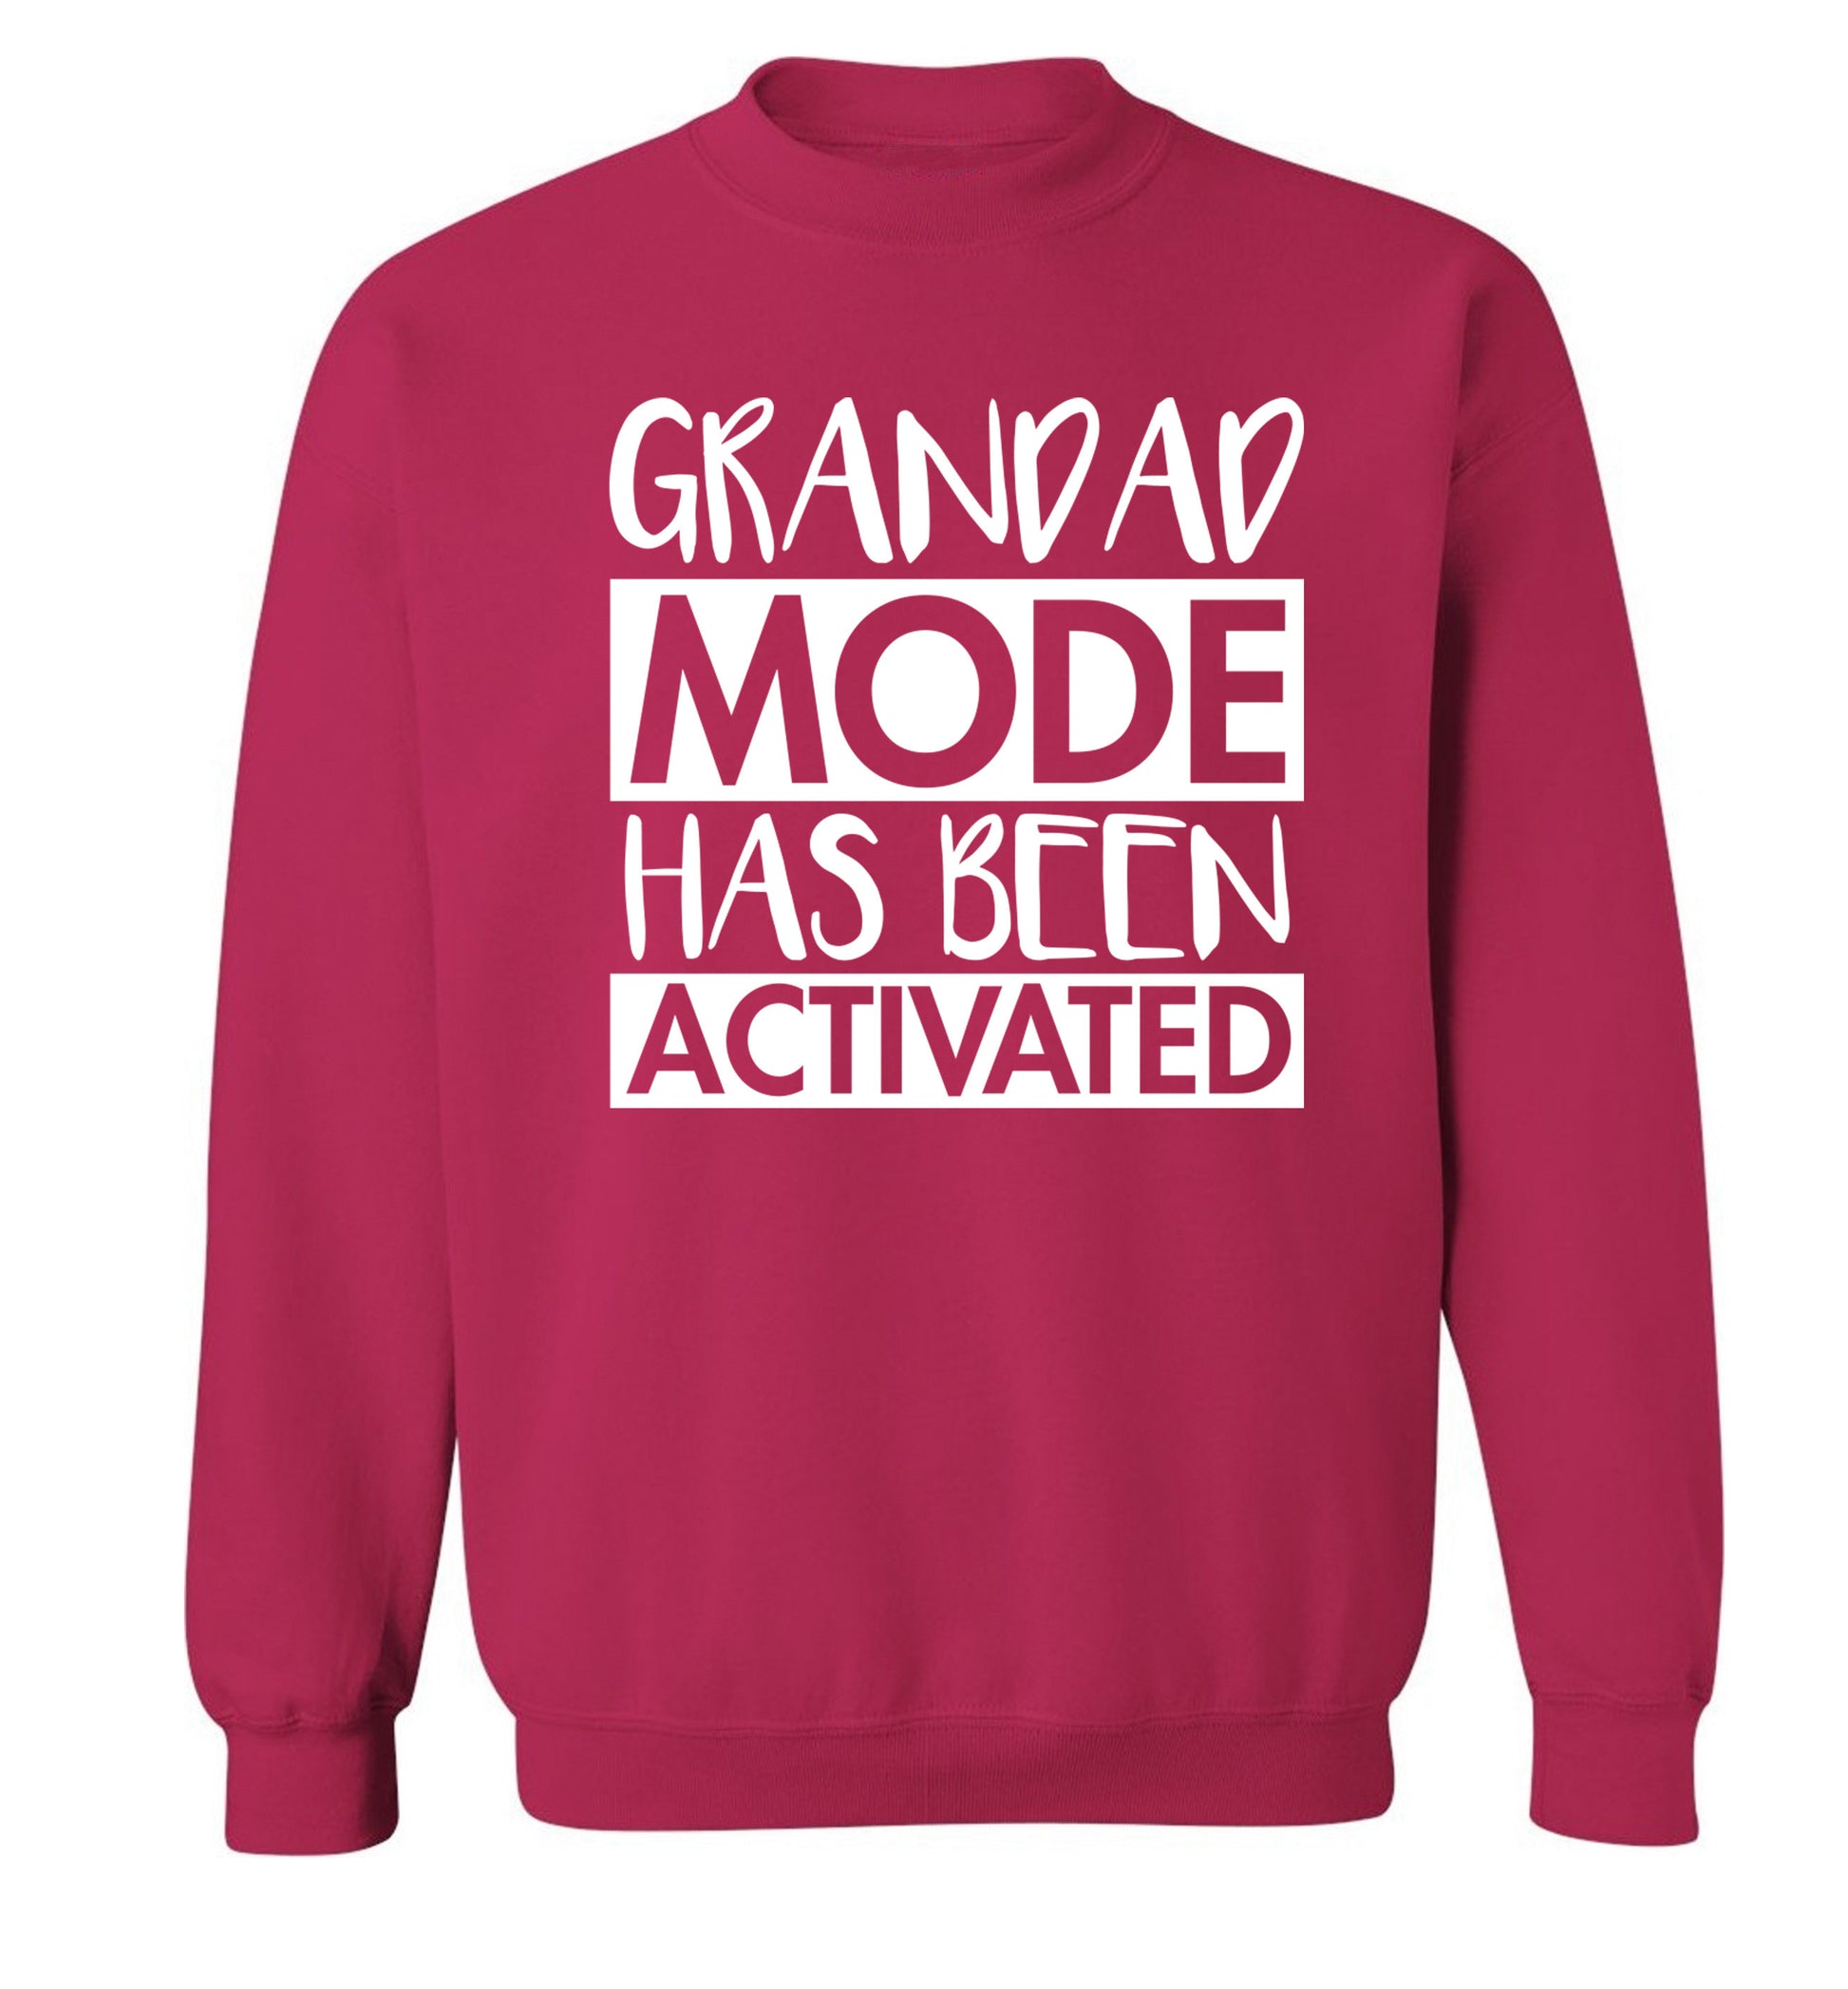 Grandad mode activated Adult's unisex pink Sweater 2XL